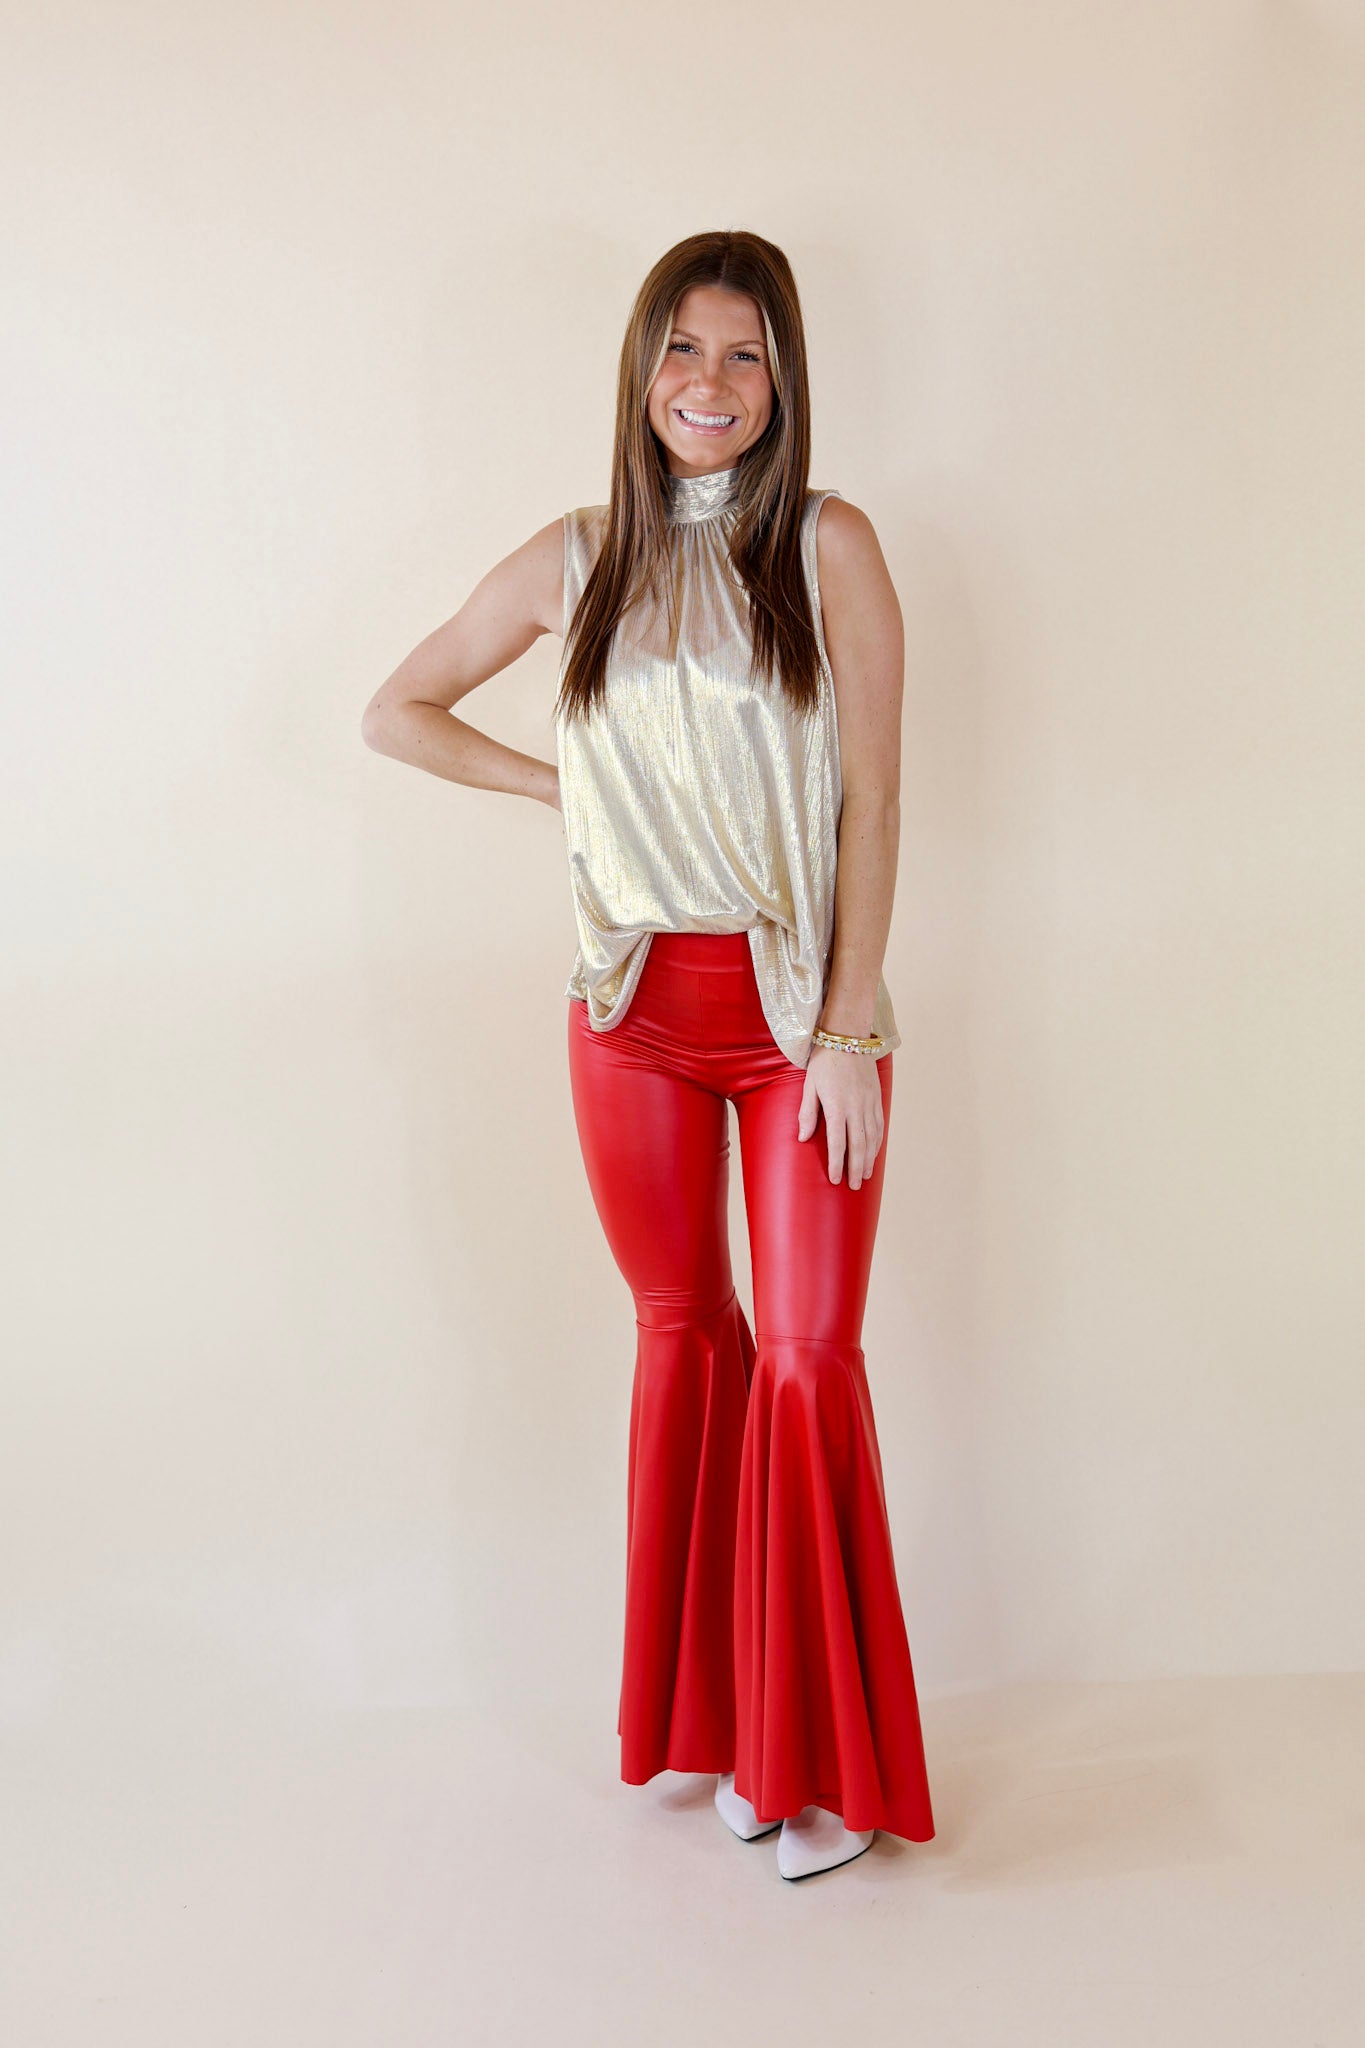 Extra Magic Mock Neck Metallic Tank Top with Tie Back in Gold